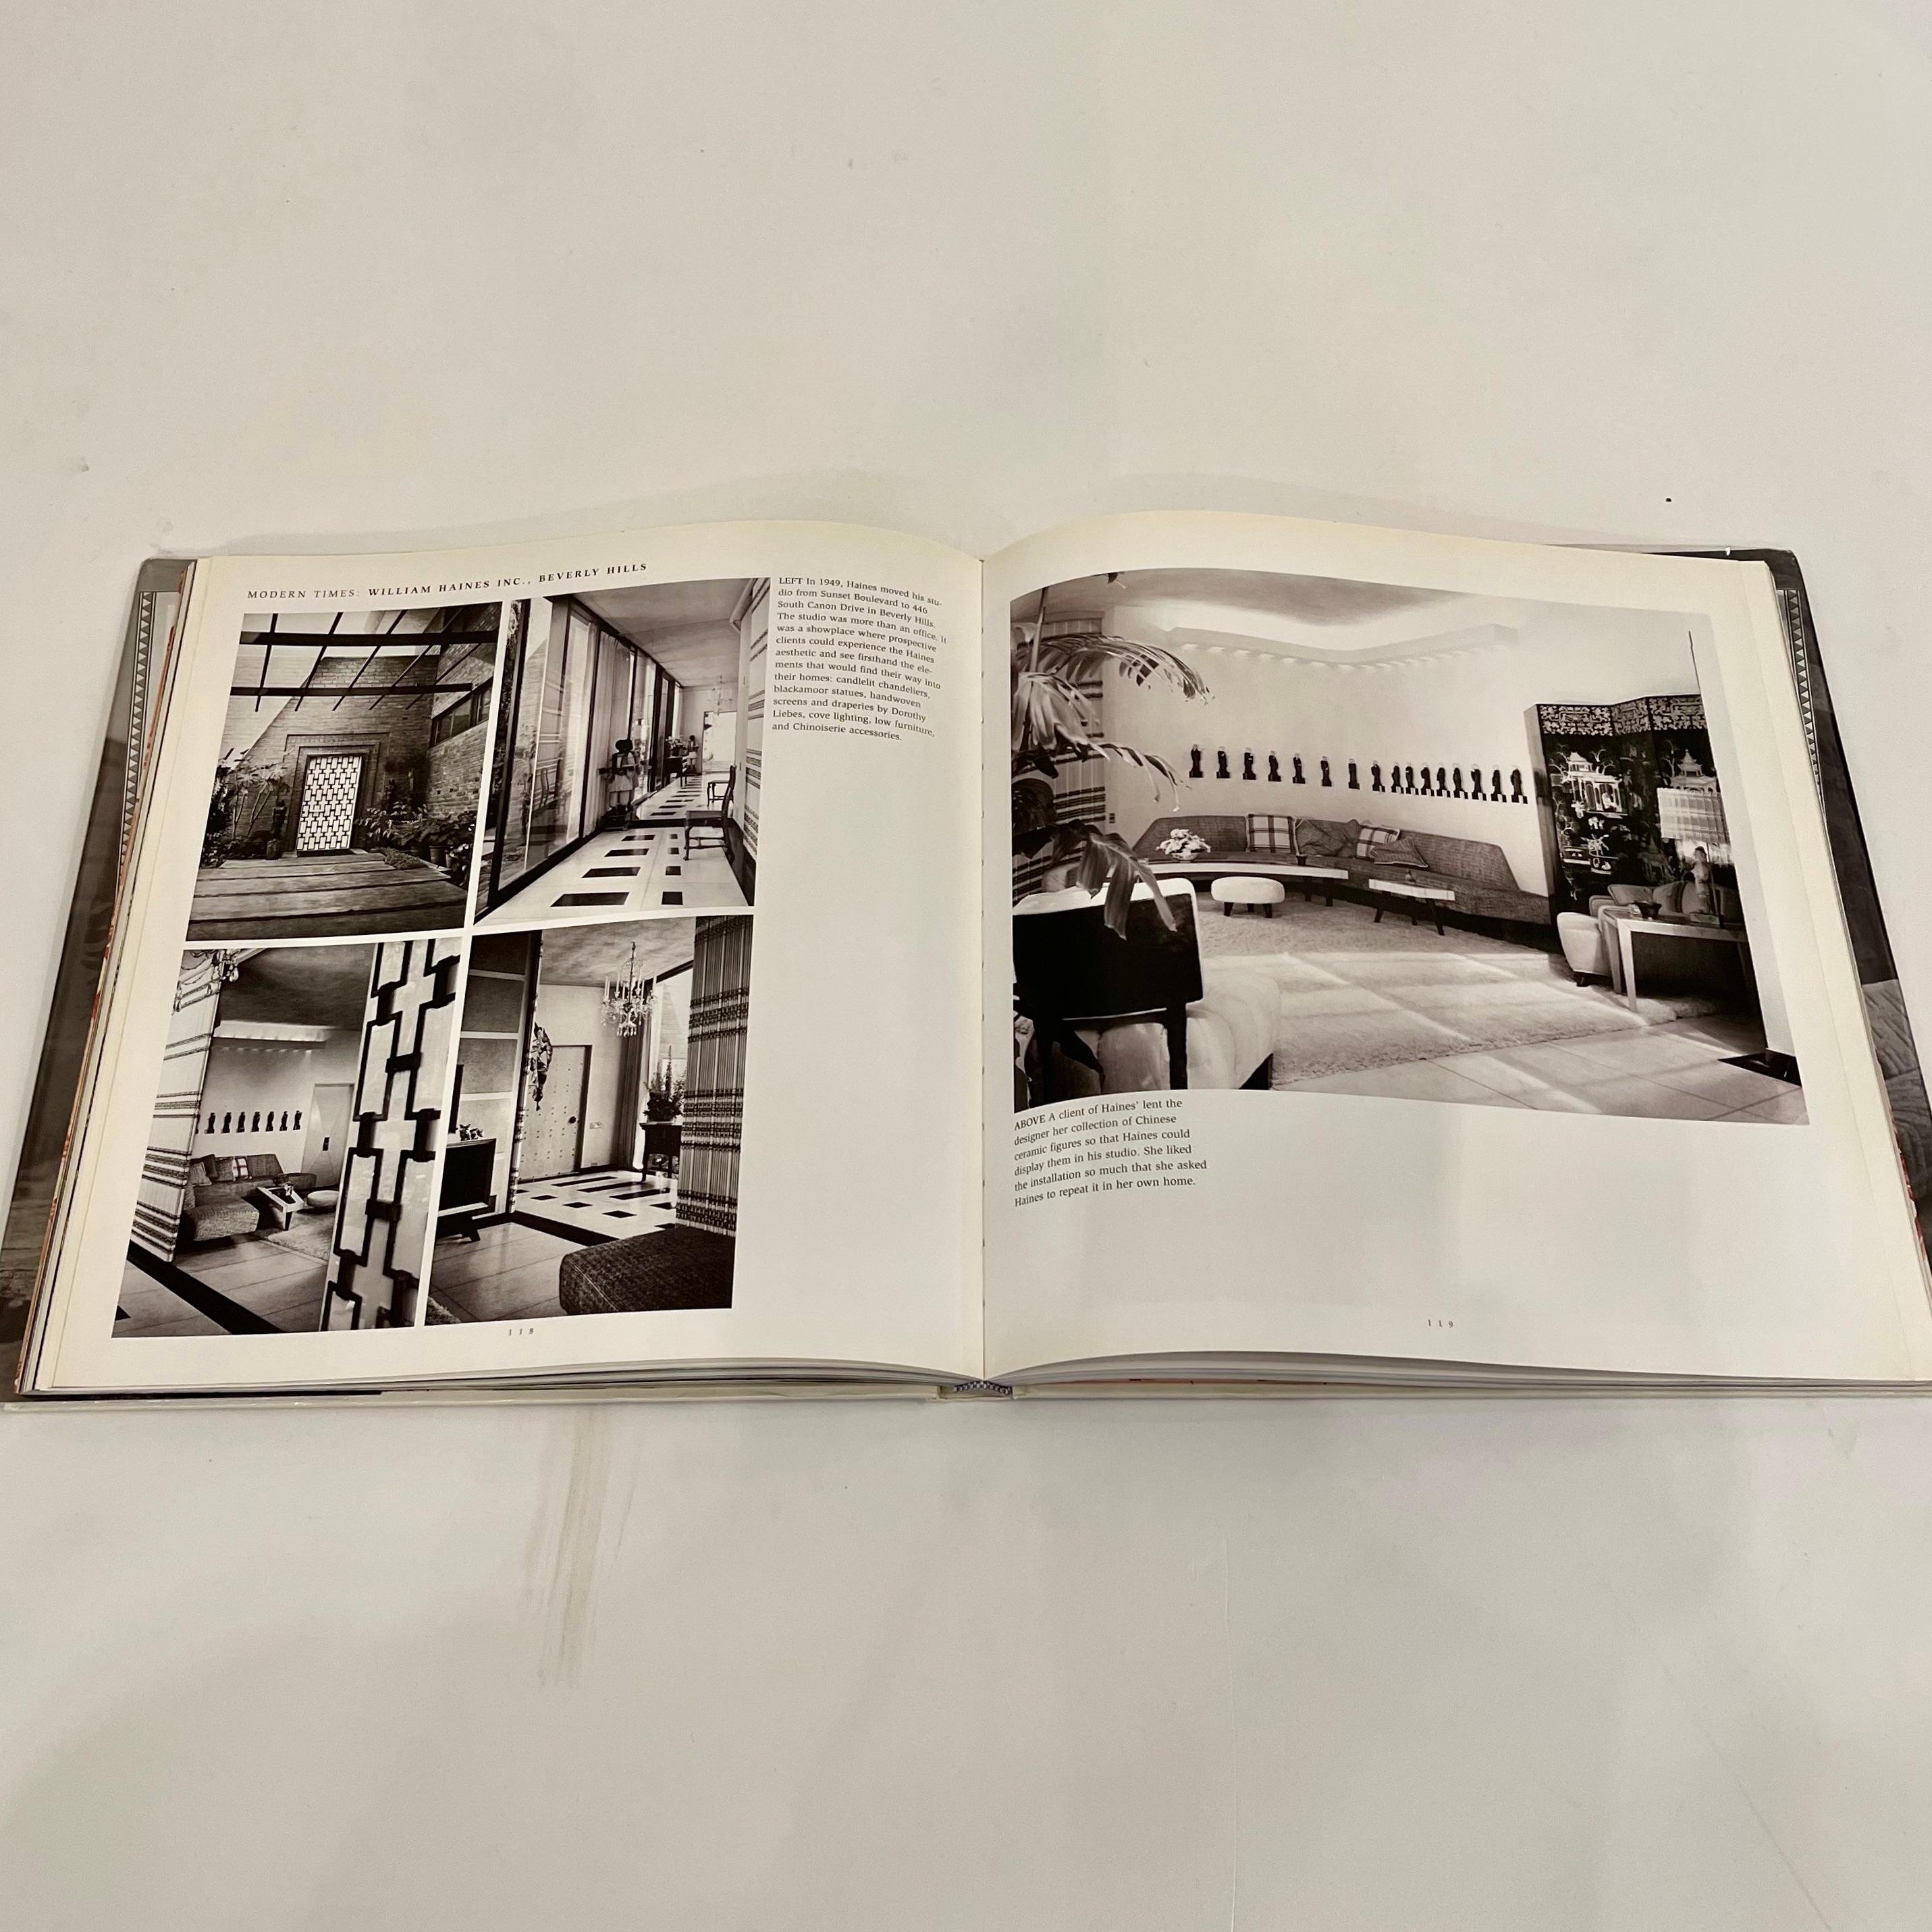 First edition, published by Pointed Leaf Press, 2005. Text by Peter Schifando and Jean H. Mathison

Drawing on a trove of photographs and archival materials, this book reveals how William Haines’ career as a decorator flourished after an early